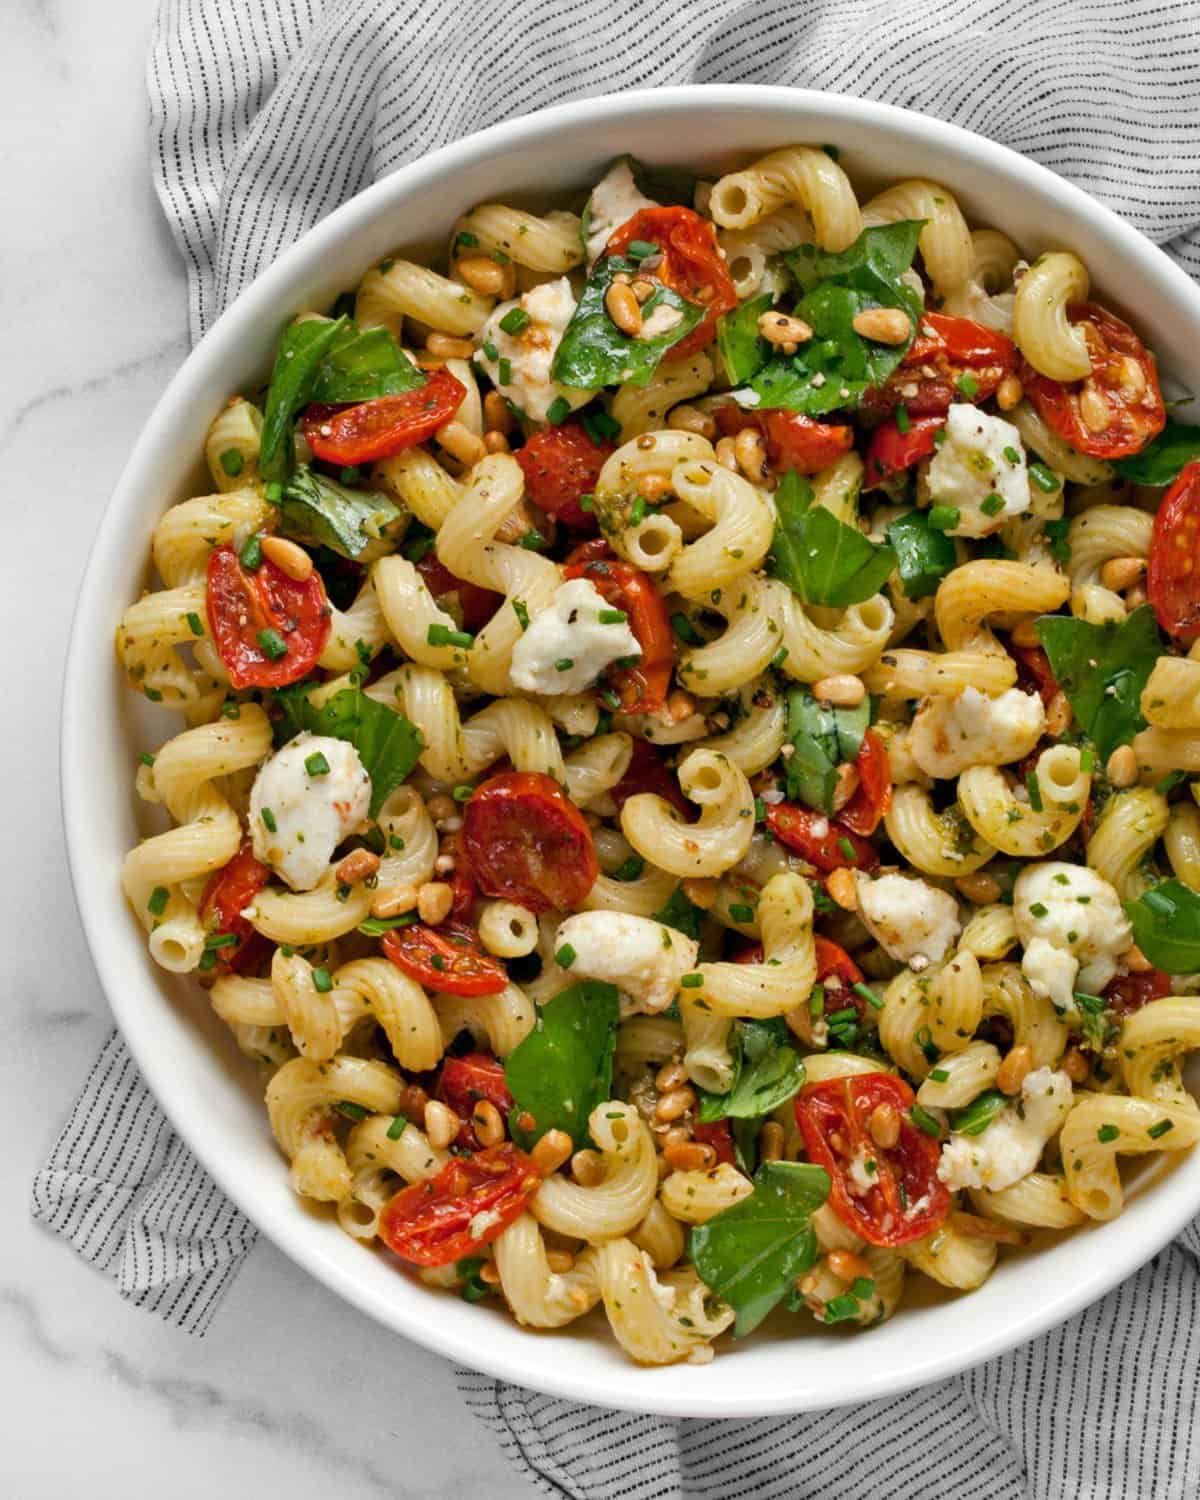 Pesto pasta salad with roasted tomatoes and mozzarella in a bowl.